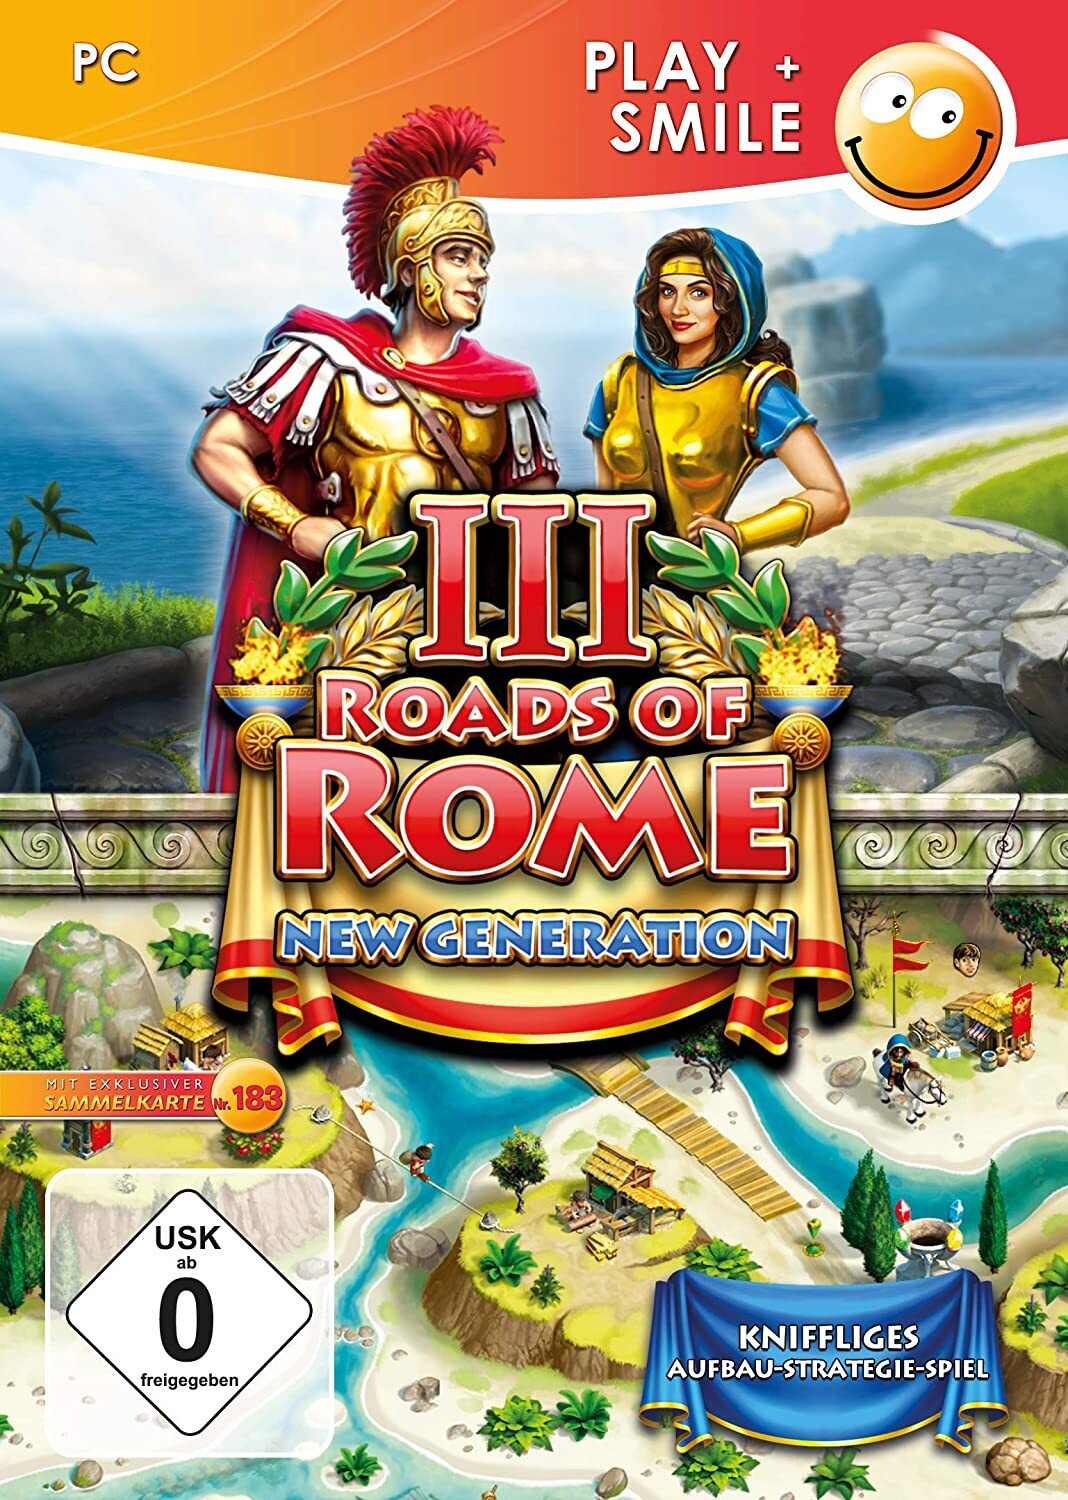 roads-of-rome-new-generation-3-collector-s-edition-pc-ab-8-79-preisvergleich-bei-idealo-at